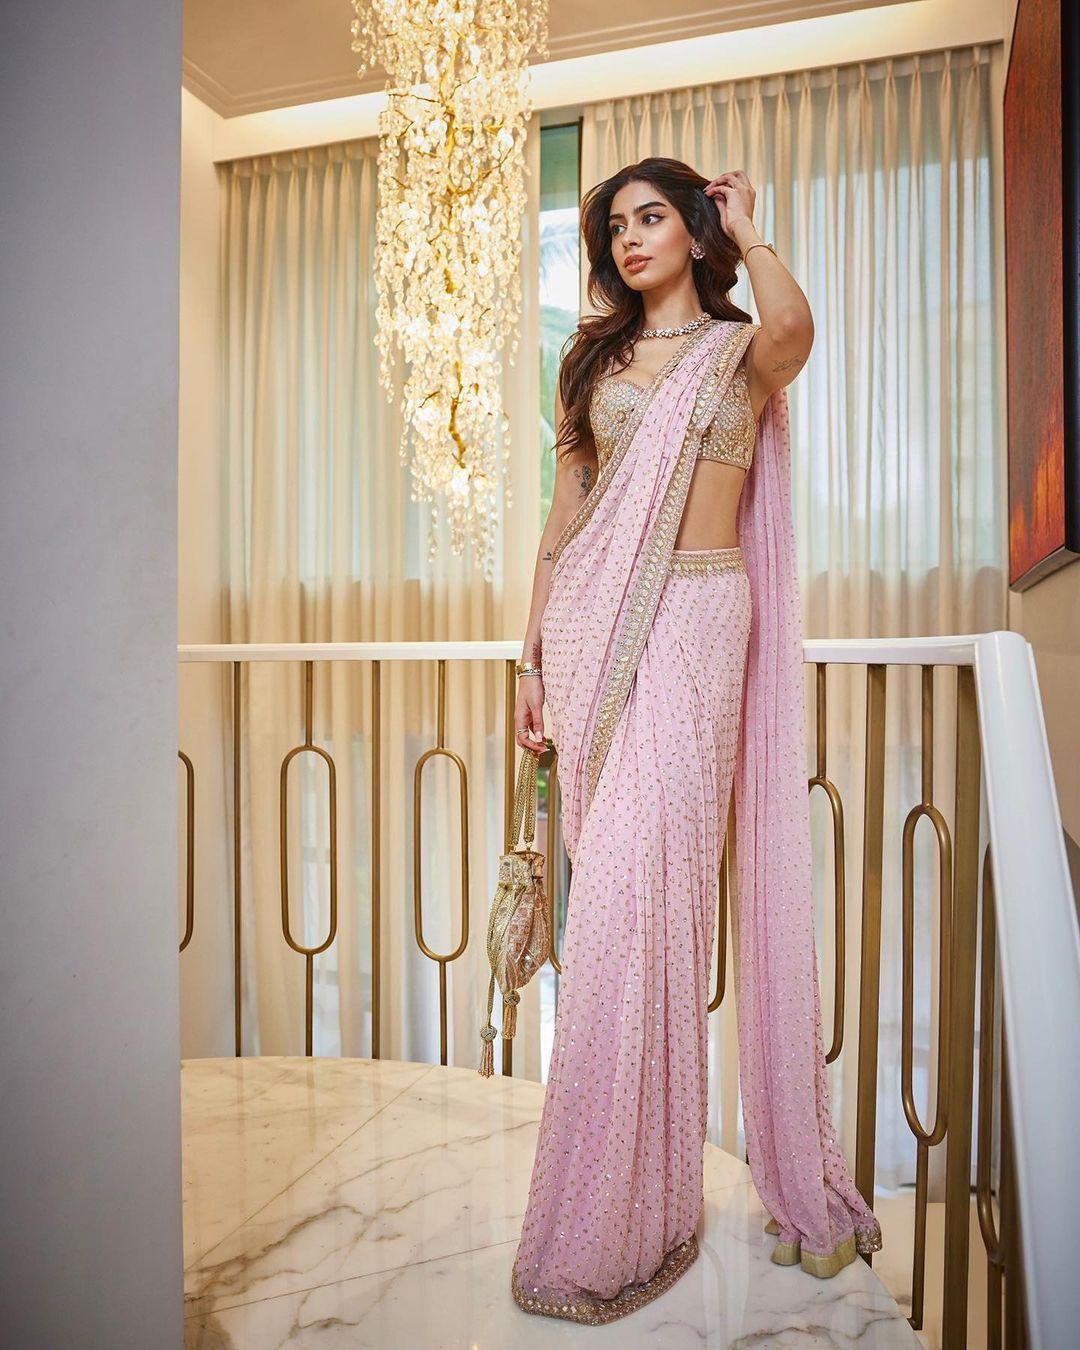 Khushi exudes regal vibes in a heavily embroidered pink saree. The combination of rich colours and traditional aesthetics showcases a perfect blend of classic elegance and modern charm